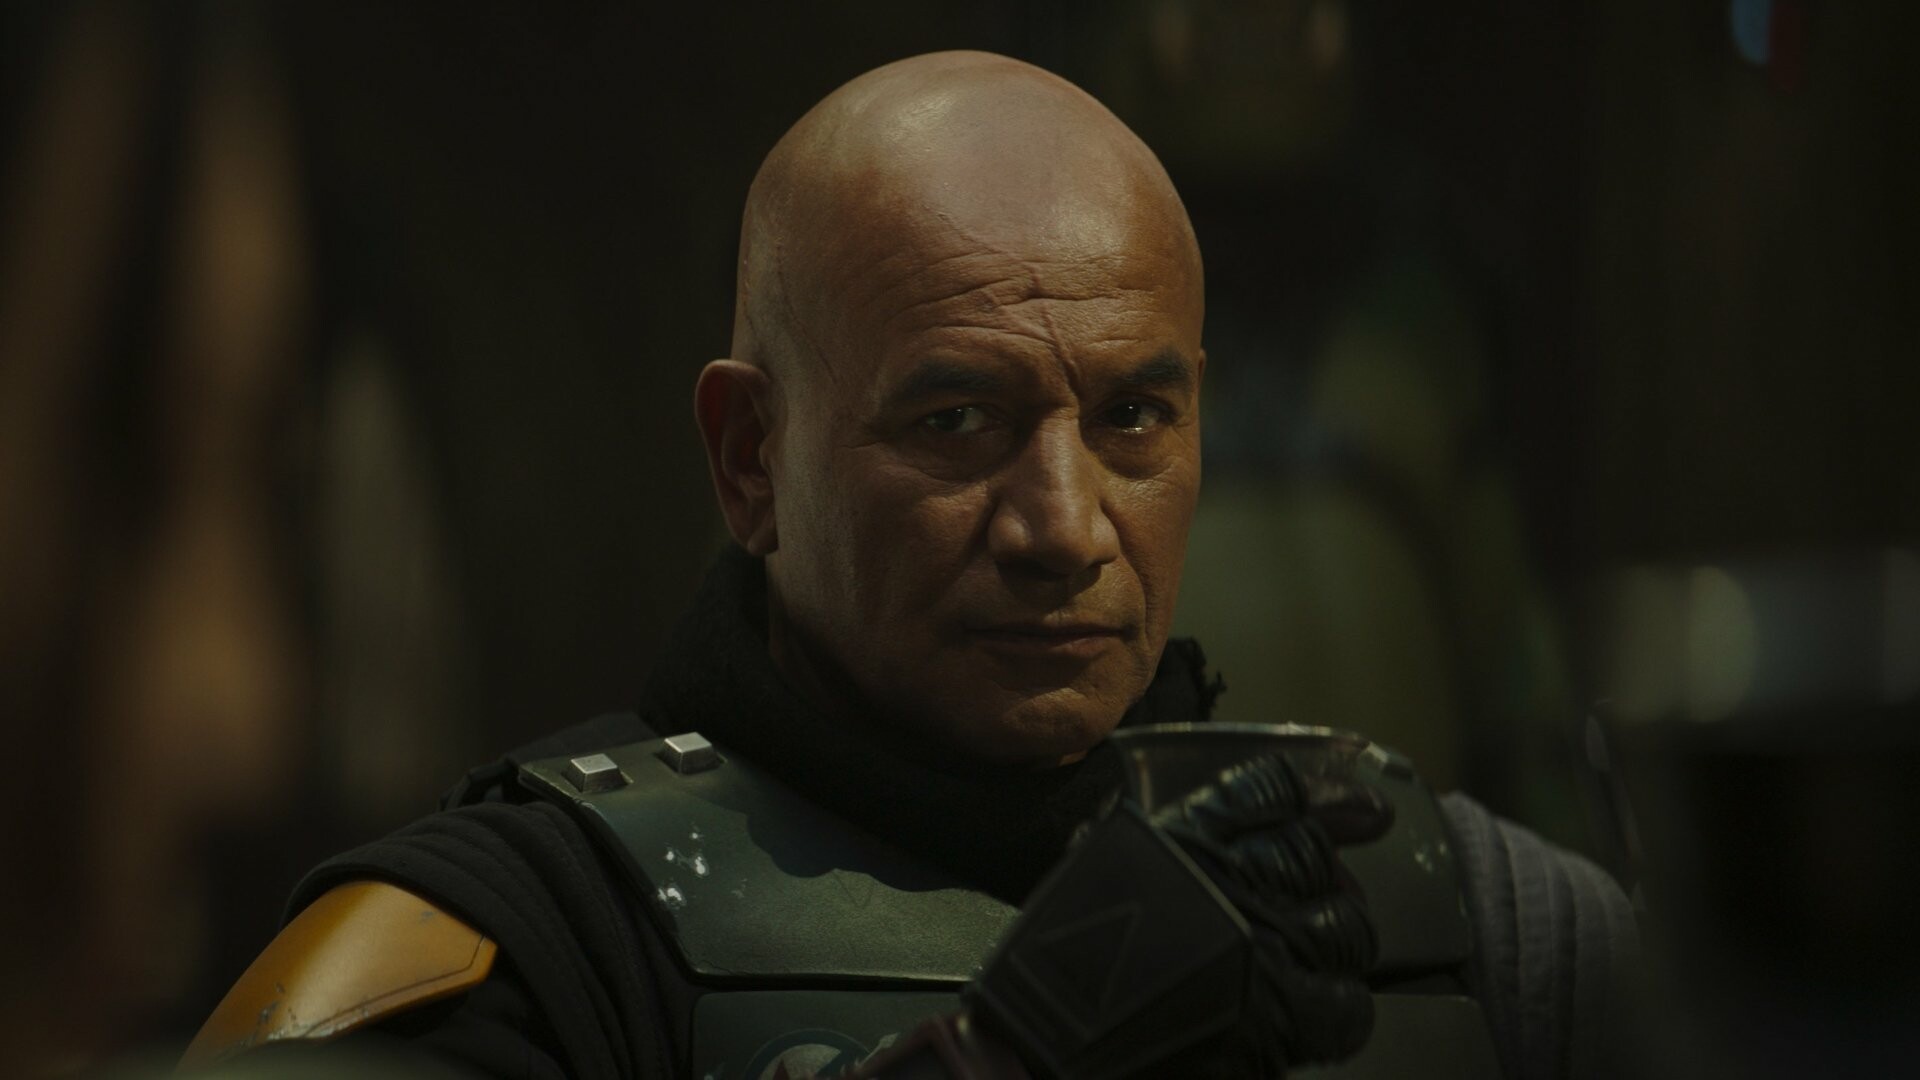 The Book of Boba Fett: Temuera Morrison, Star Wars, Spin-off series. 1920x1080 Full HD Background.